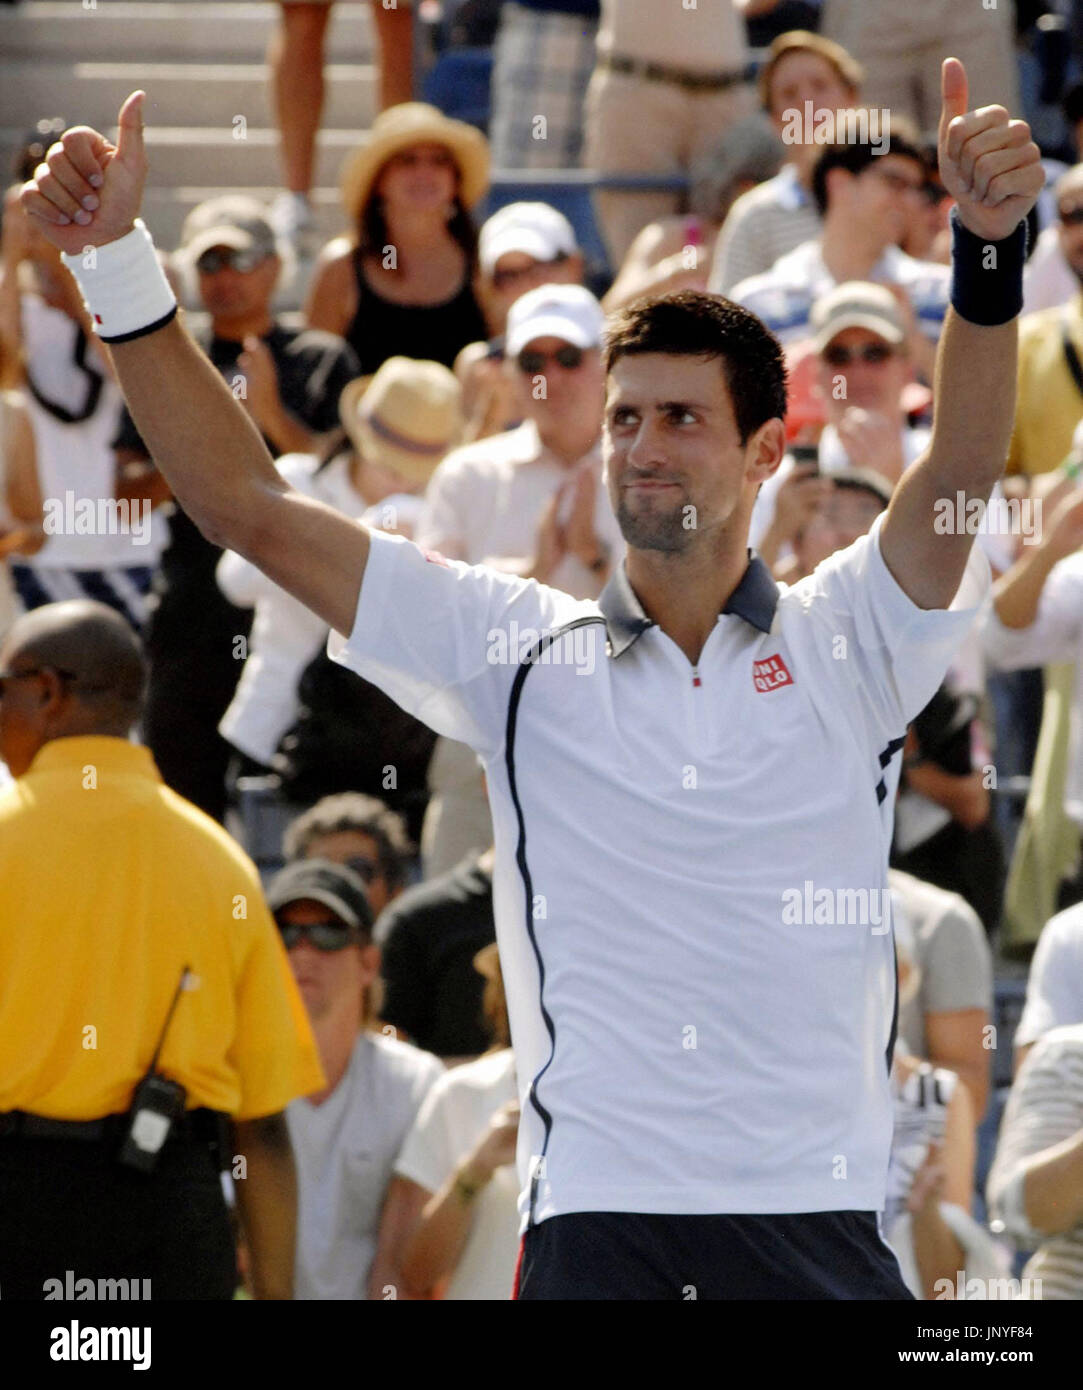 NEW YORK, United States - Serbia's Novak Djokovic responds to cheers after winning in his second round men's singles match against Brazil's Rogerio Dutra Silva at the U.S. Open championship in New York on Aug. 31, 2012. Djokovic advanced to the third round. (Kyodo) Stock Photo